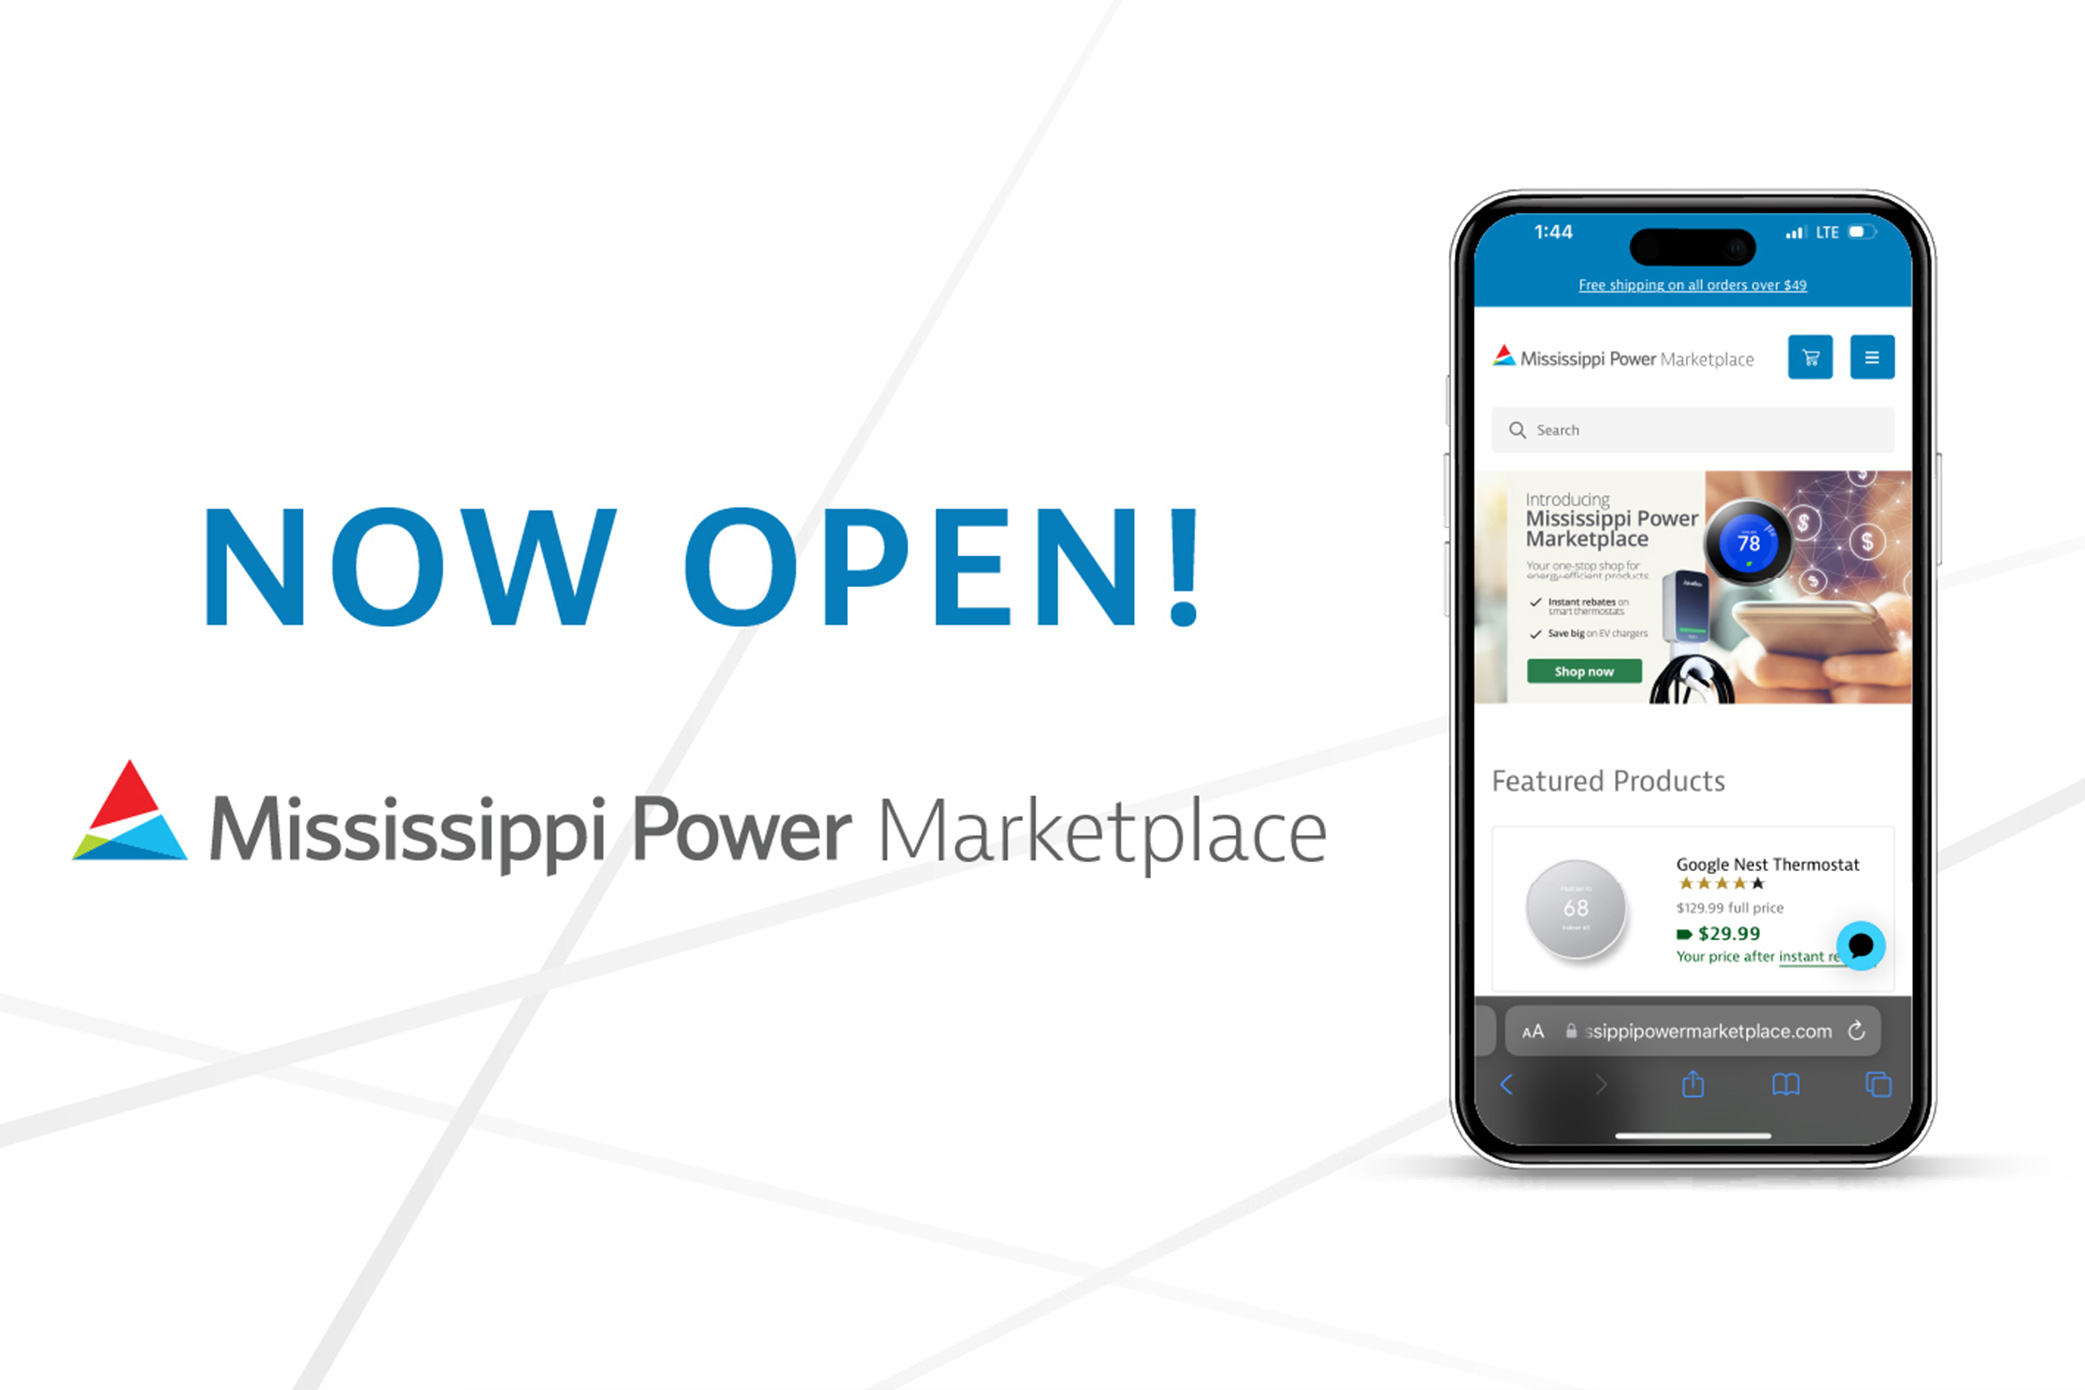 Image of Mississippi Power's Marketplace Landing Page on a Mobile Phone